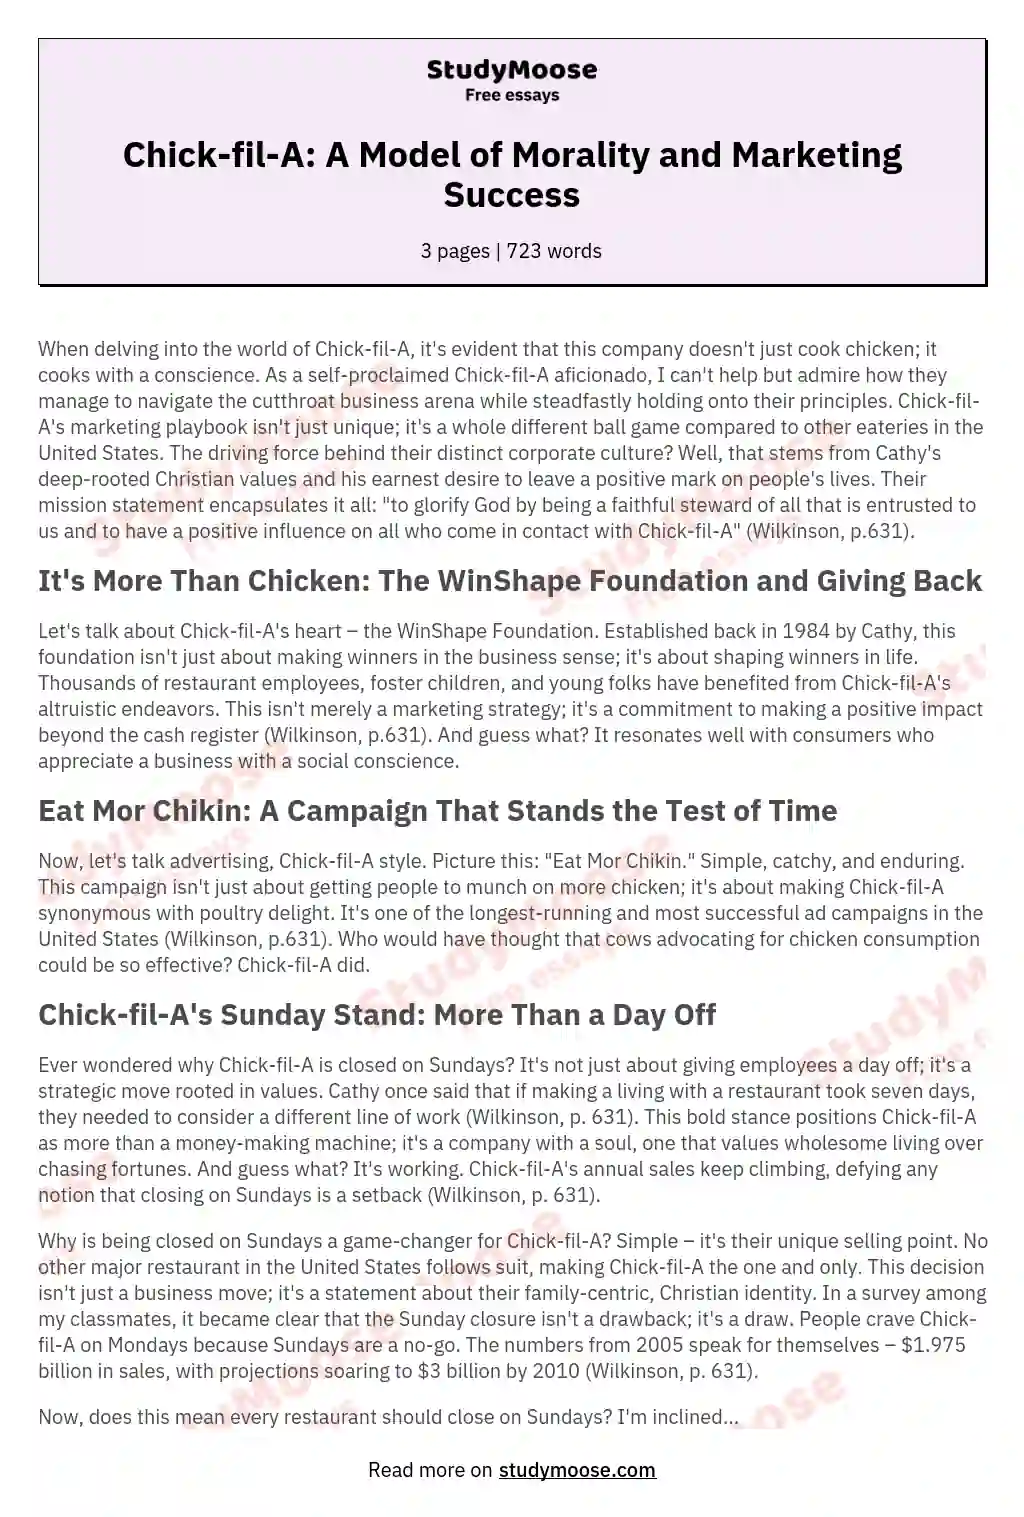 Chick-fil-A: A Model of Morality and Marketing Success essay